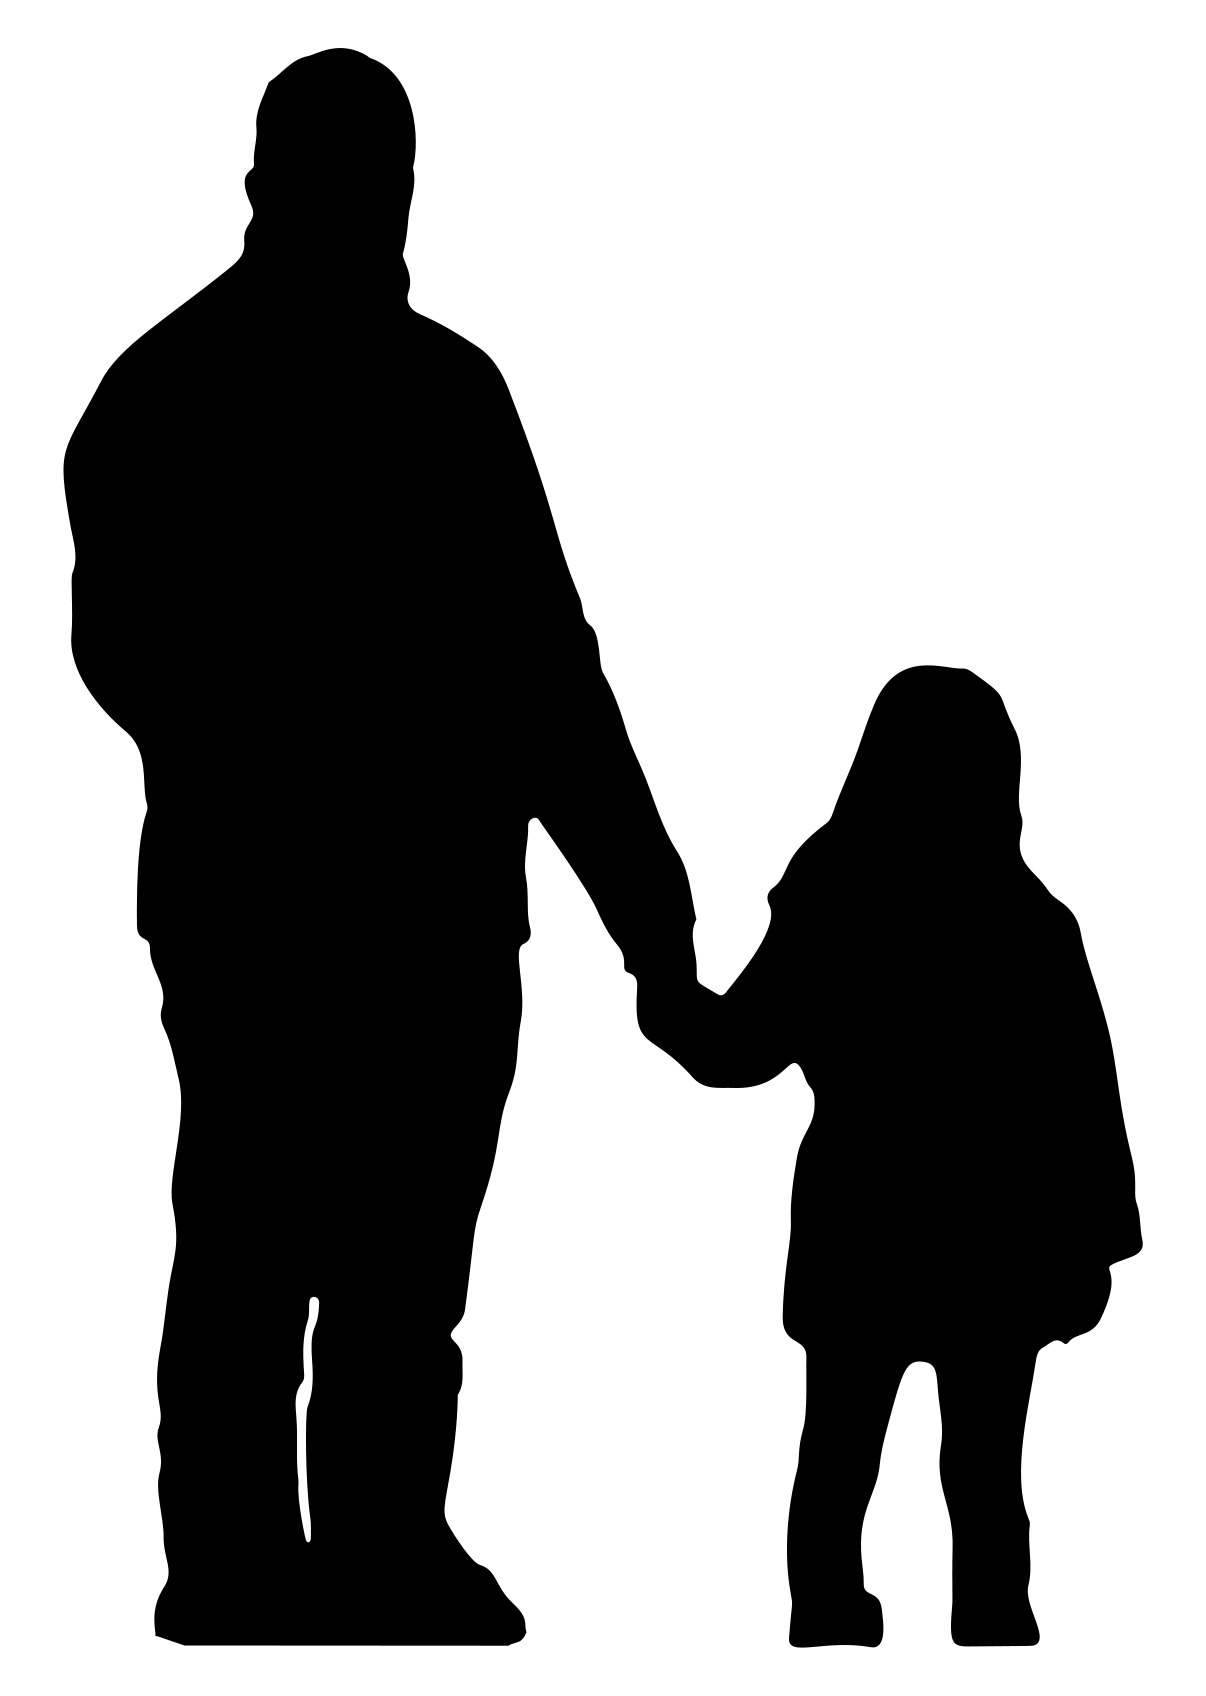 Father And Child Girl Holding Hands Silhouette Free Image Download